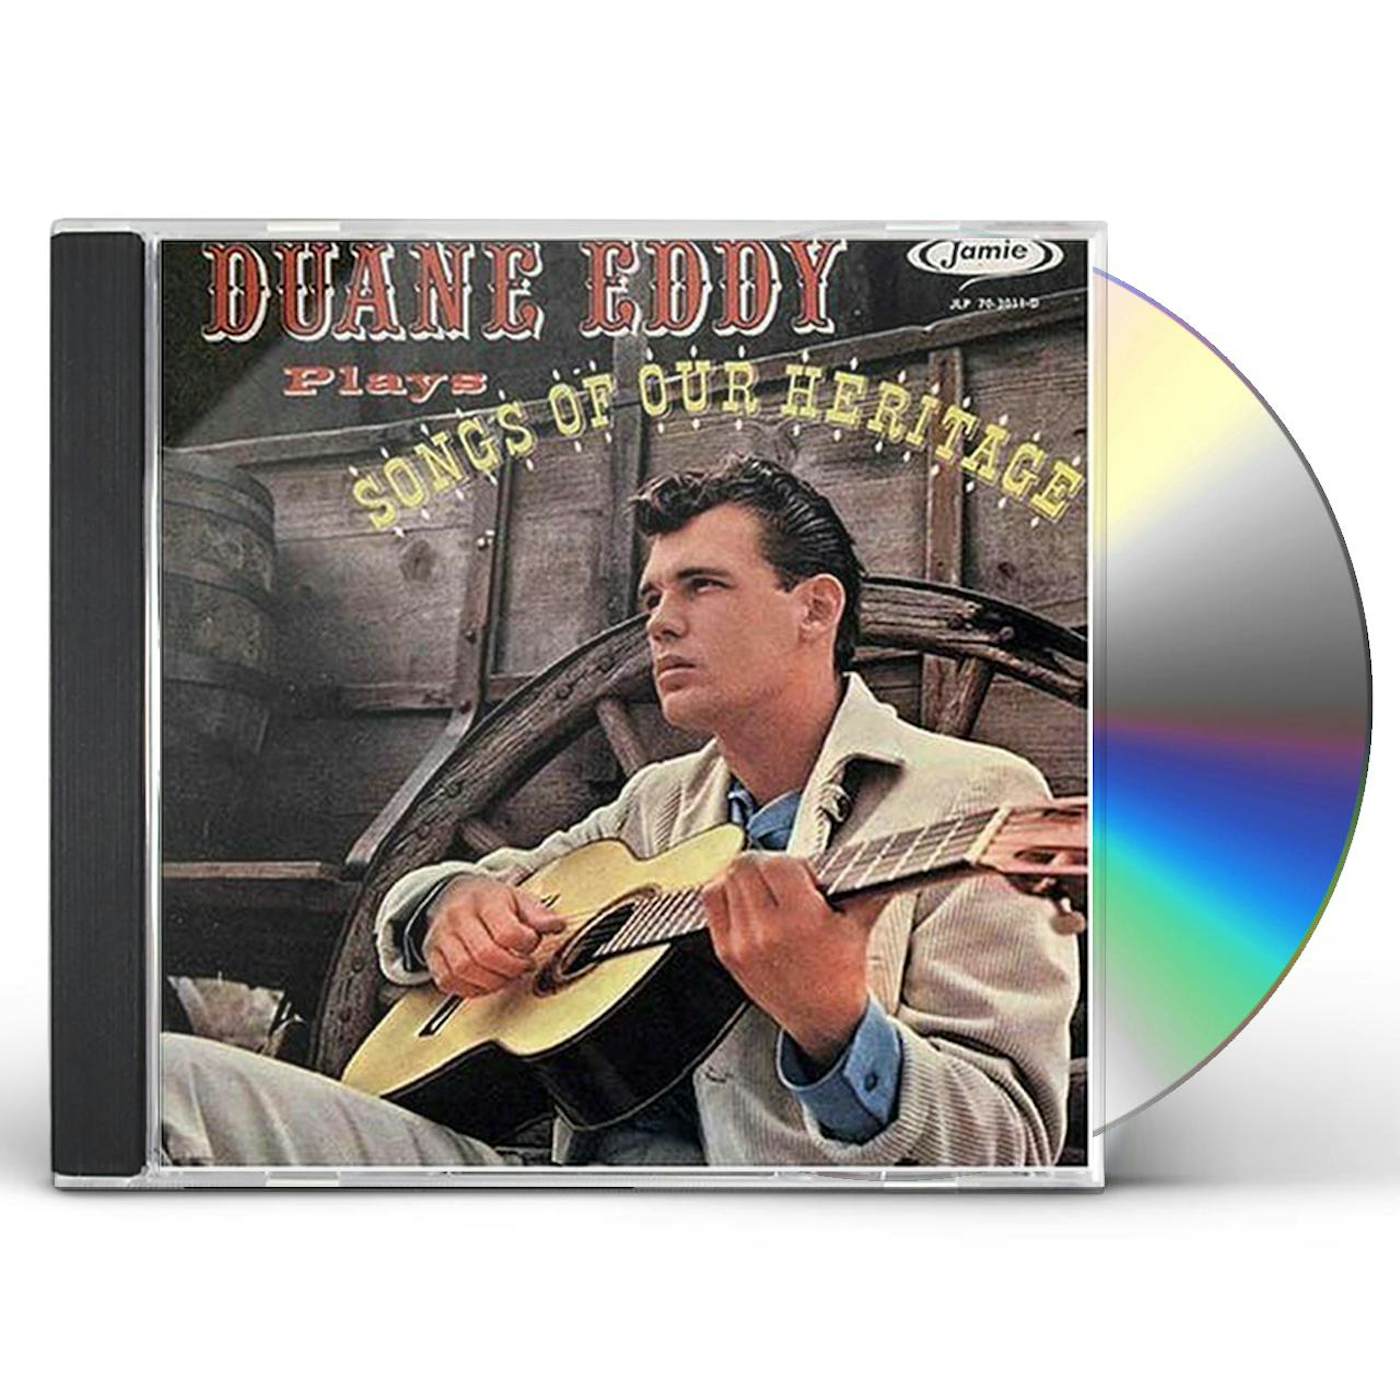 Eddy Duane SONGS OF OUR HERITAGE CD